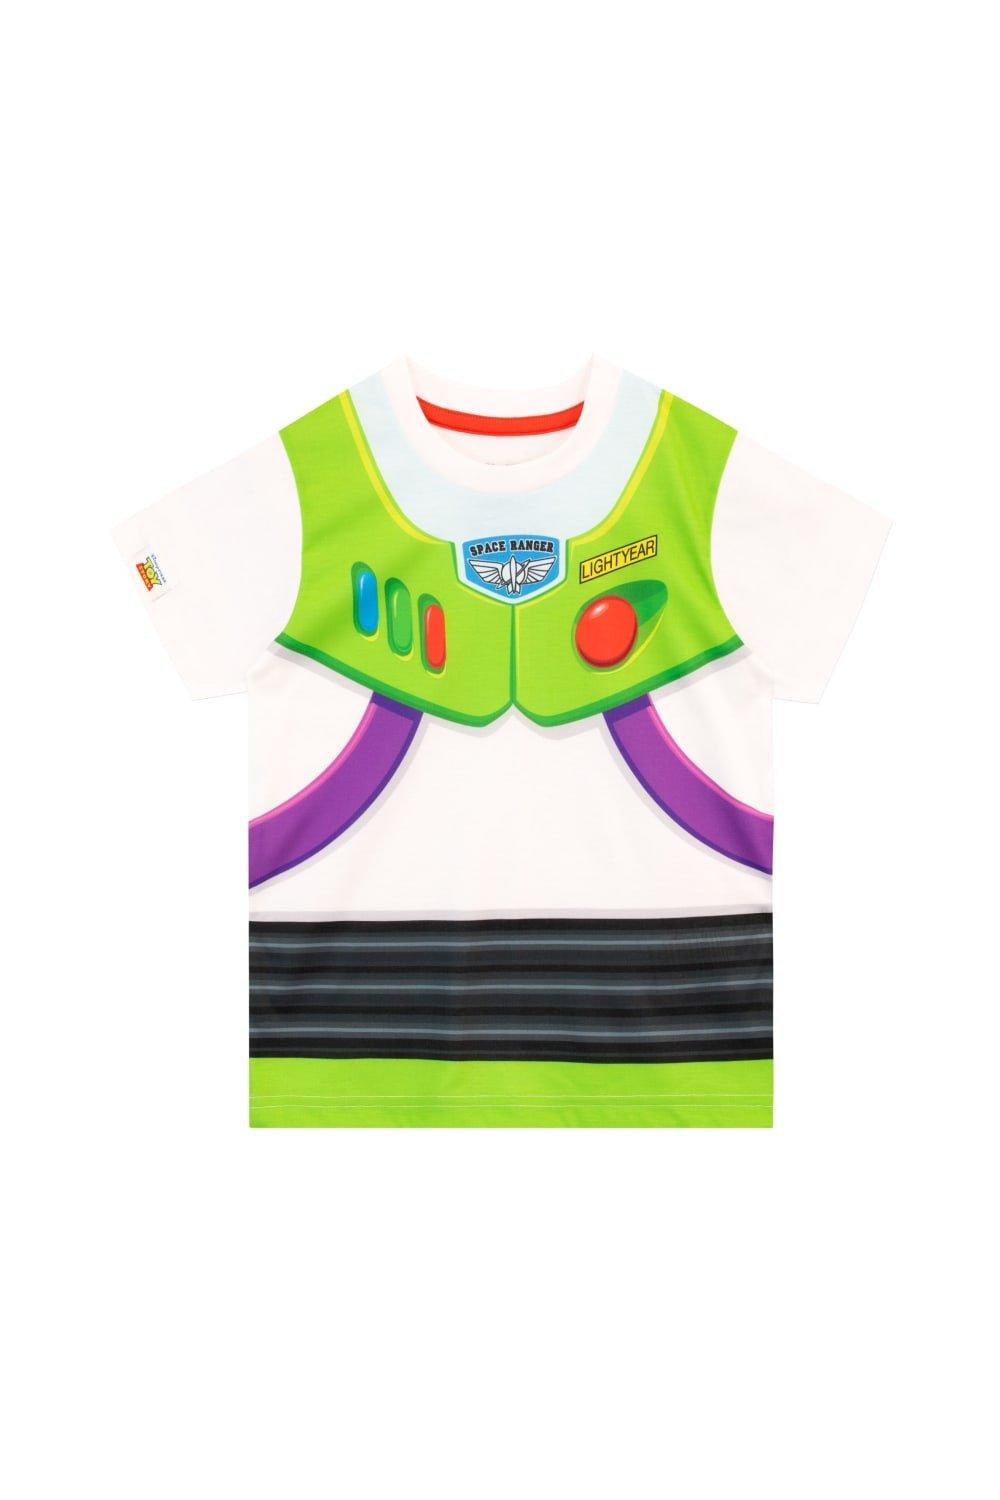 Toy Story Space Rangers Buzz Lightyear T-Shirt